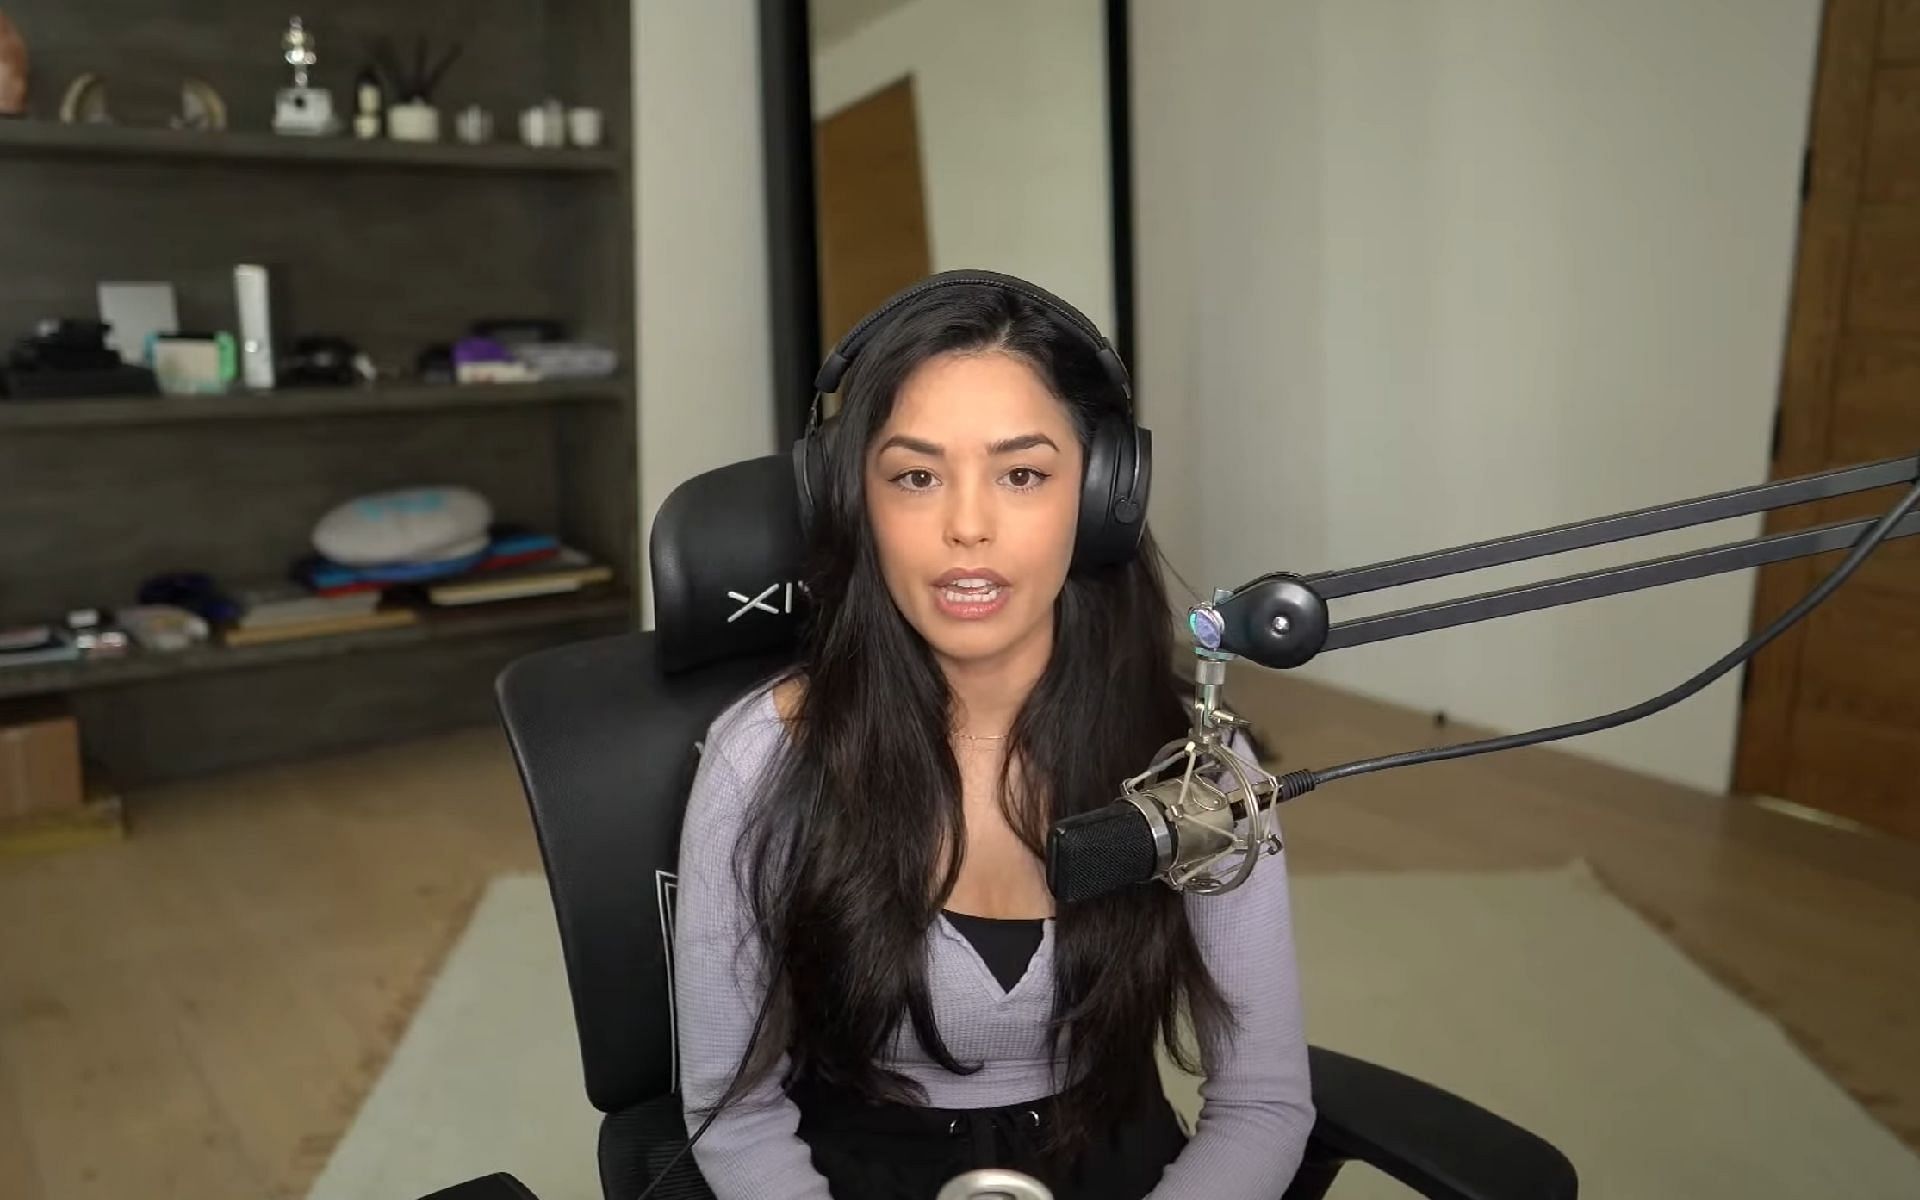 Valkyrae talks about fans shipping her with various male friends (Image via Shrimpkkuno/YouTube)